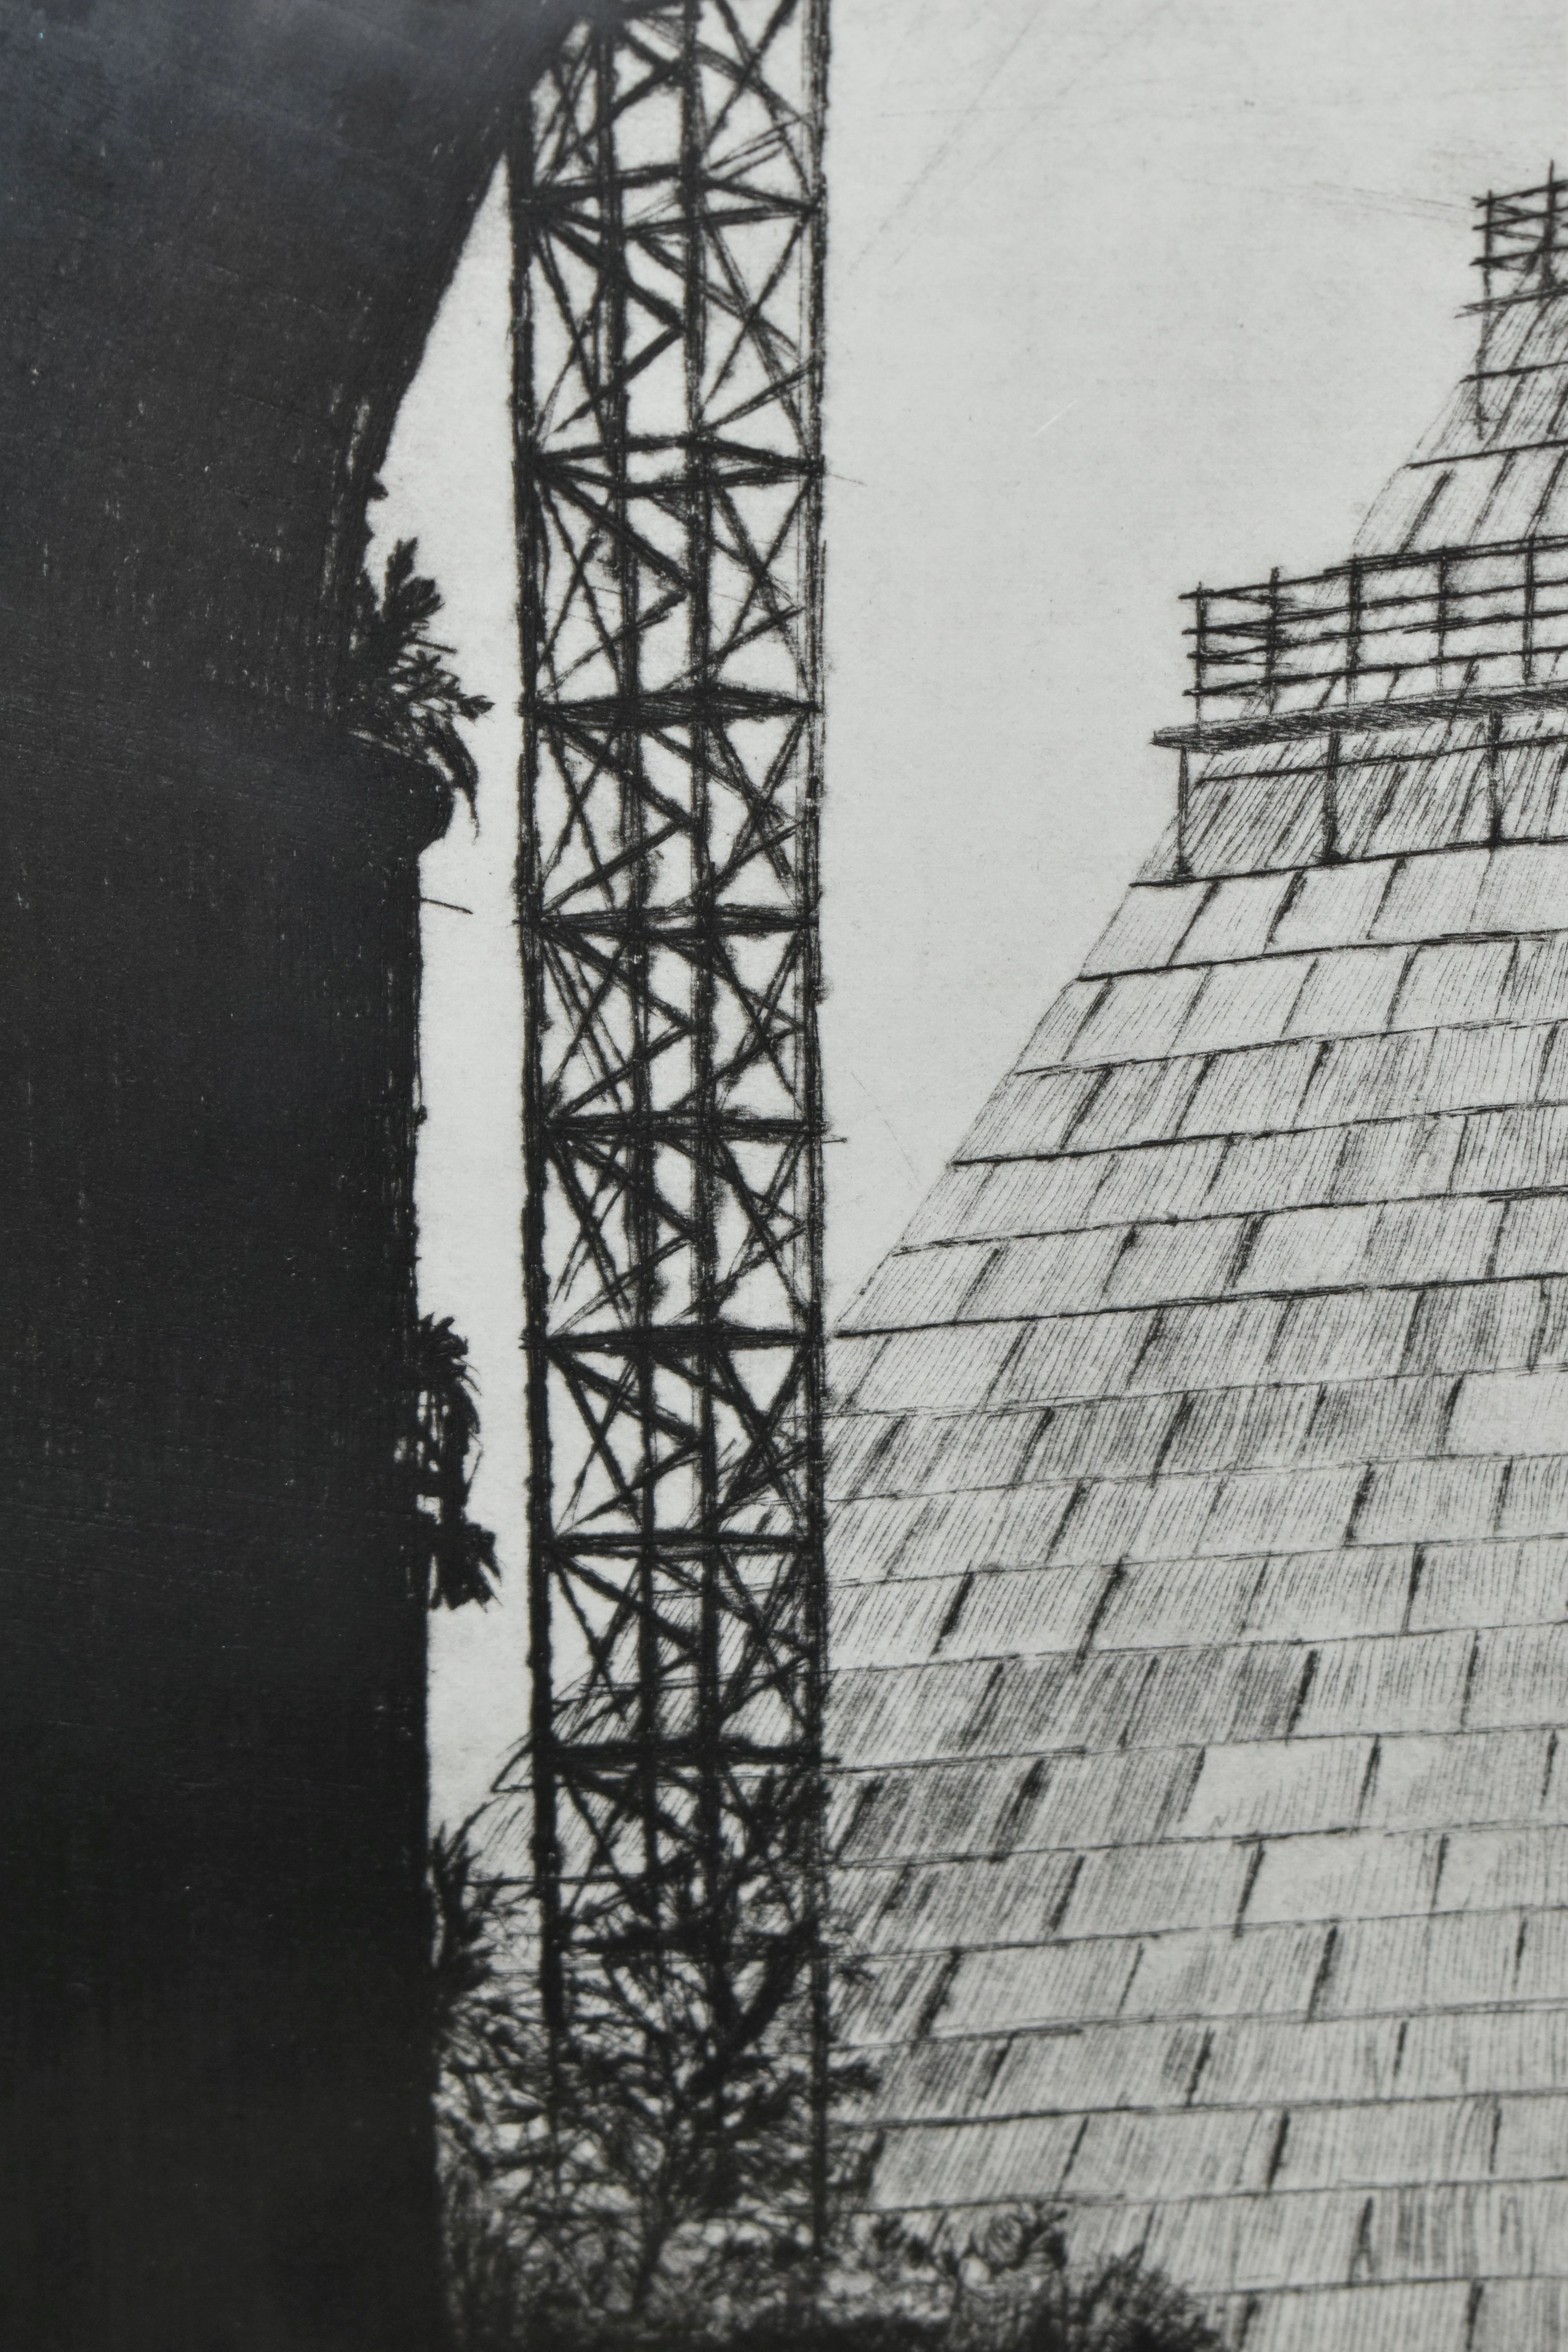 JOHN HOWARD (BRITISH 1958) 'PYRAMIDE DI BIRMINGHAM', a limited edition dry point etching depicting - Image 6 of 6